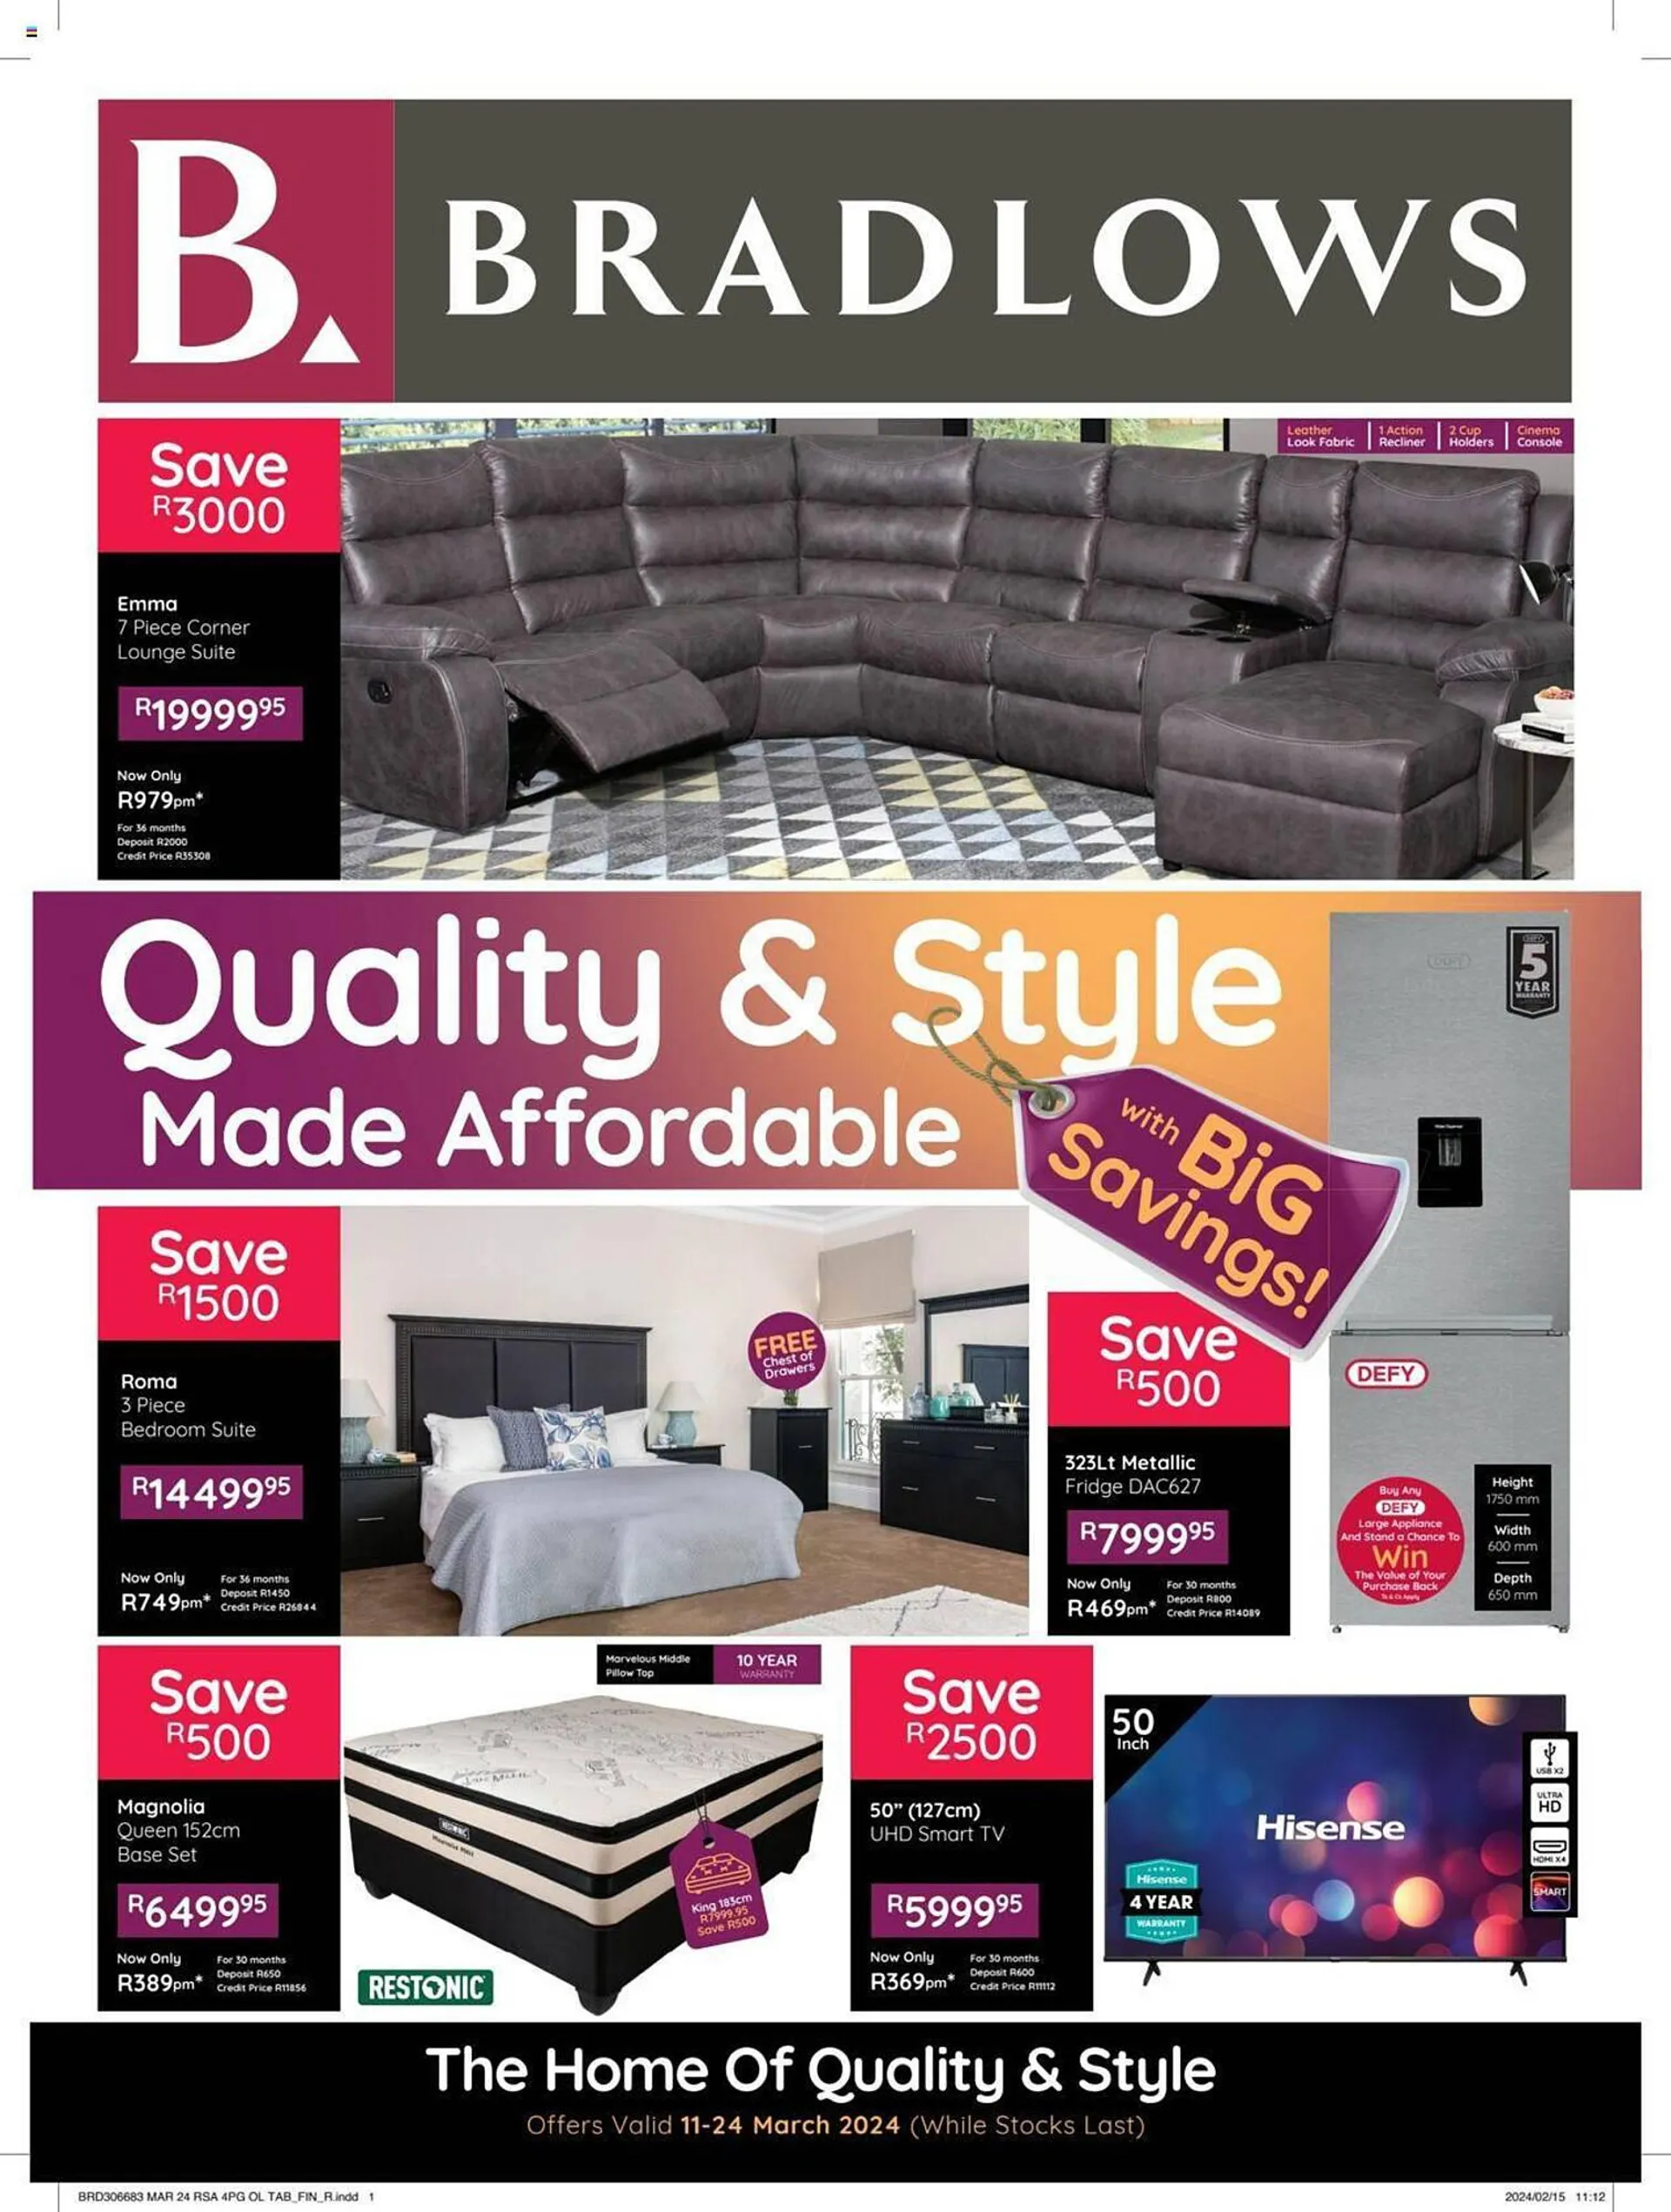 Bradlows catalogue - 11 March 24 March 2024